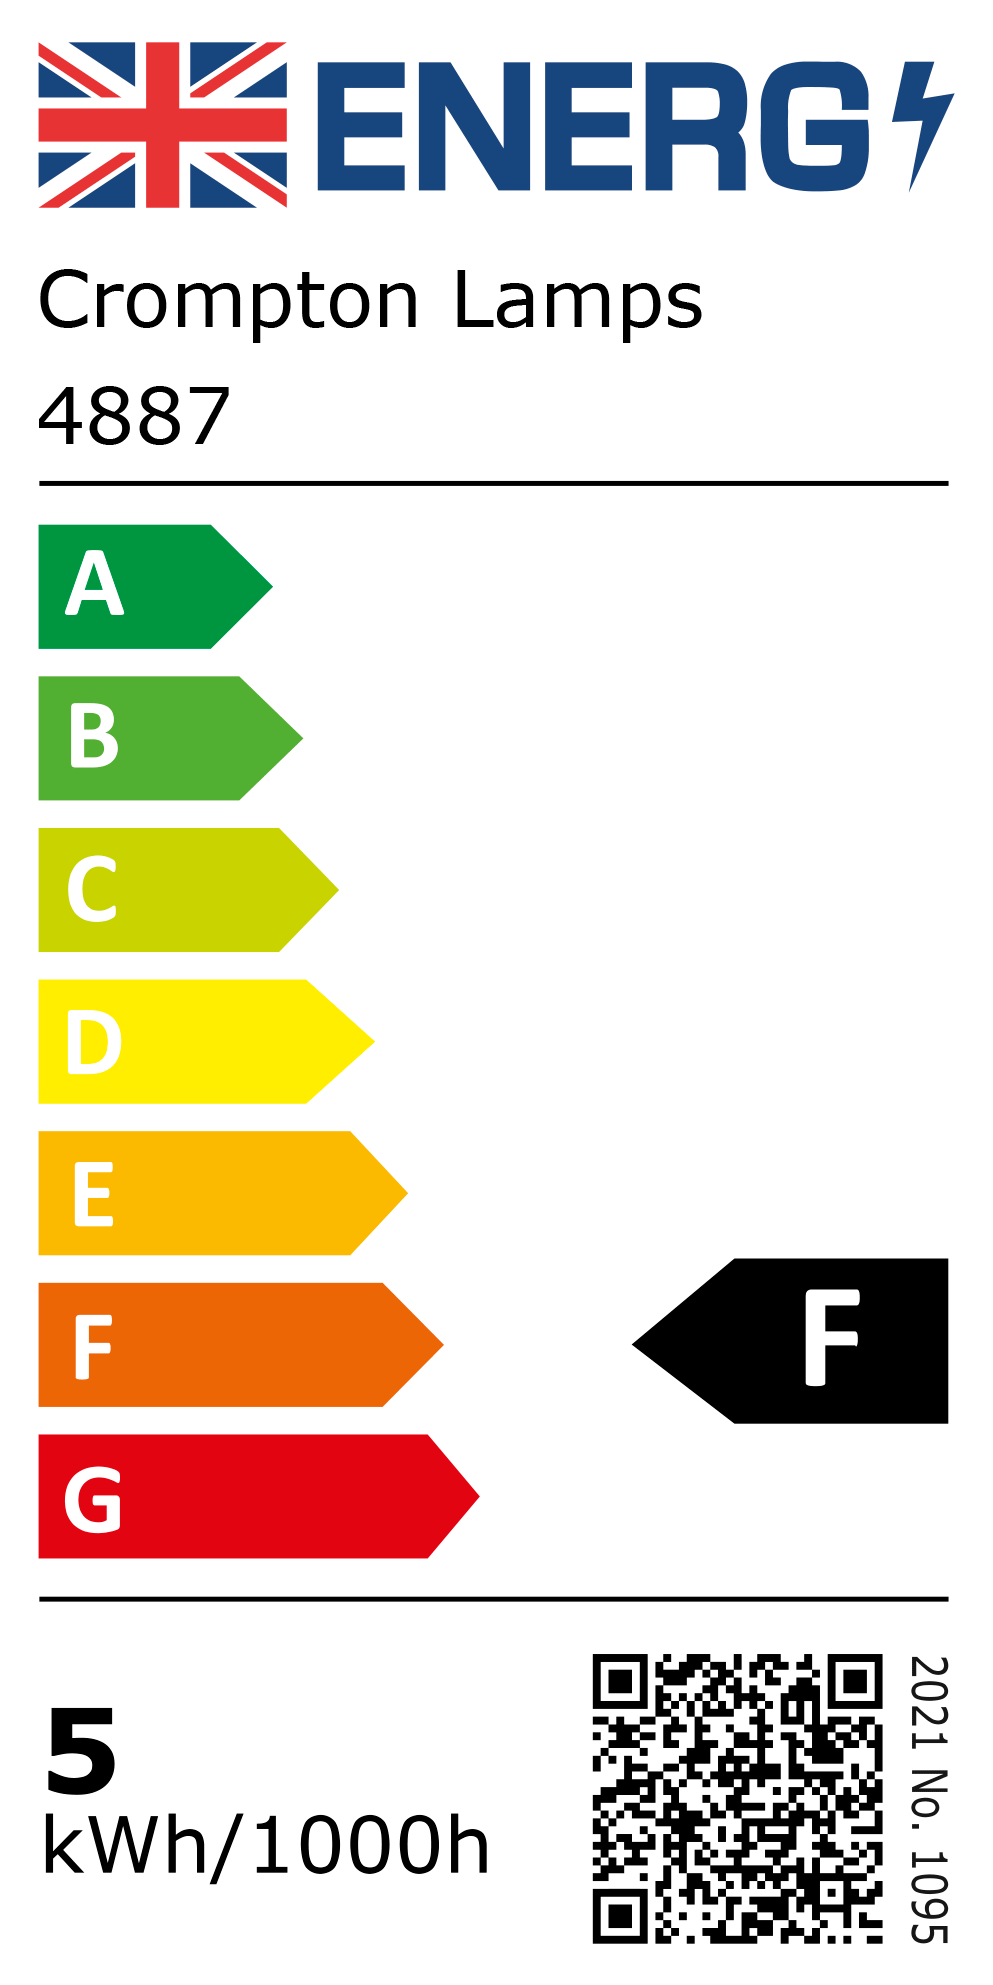 New 2021 Energy Rating Label: Stock Code 4887